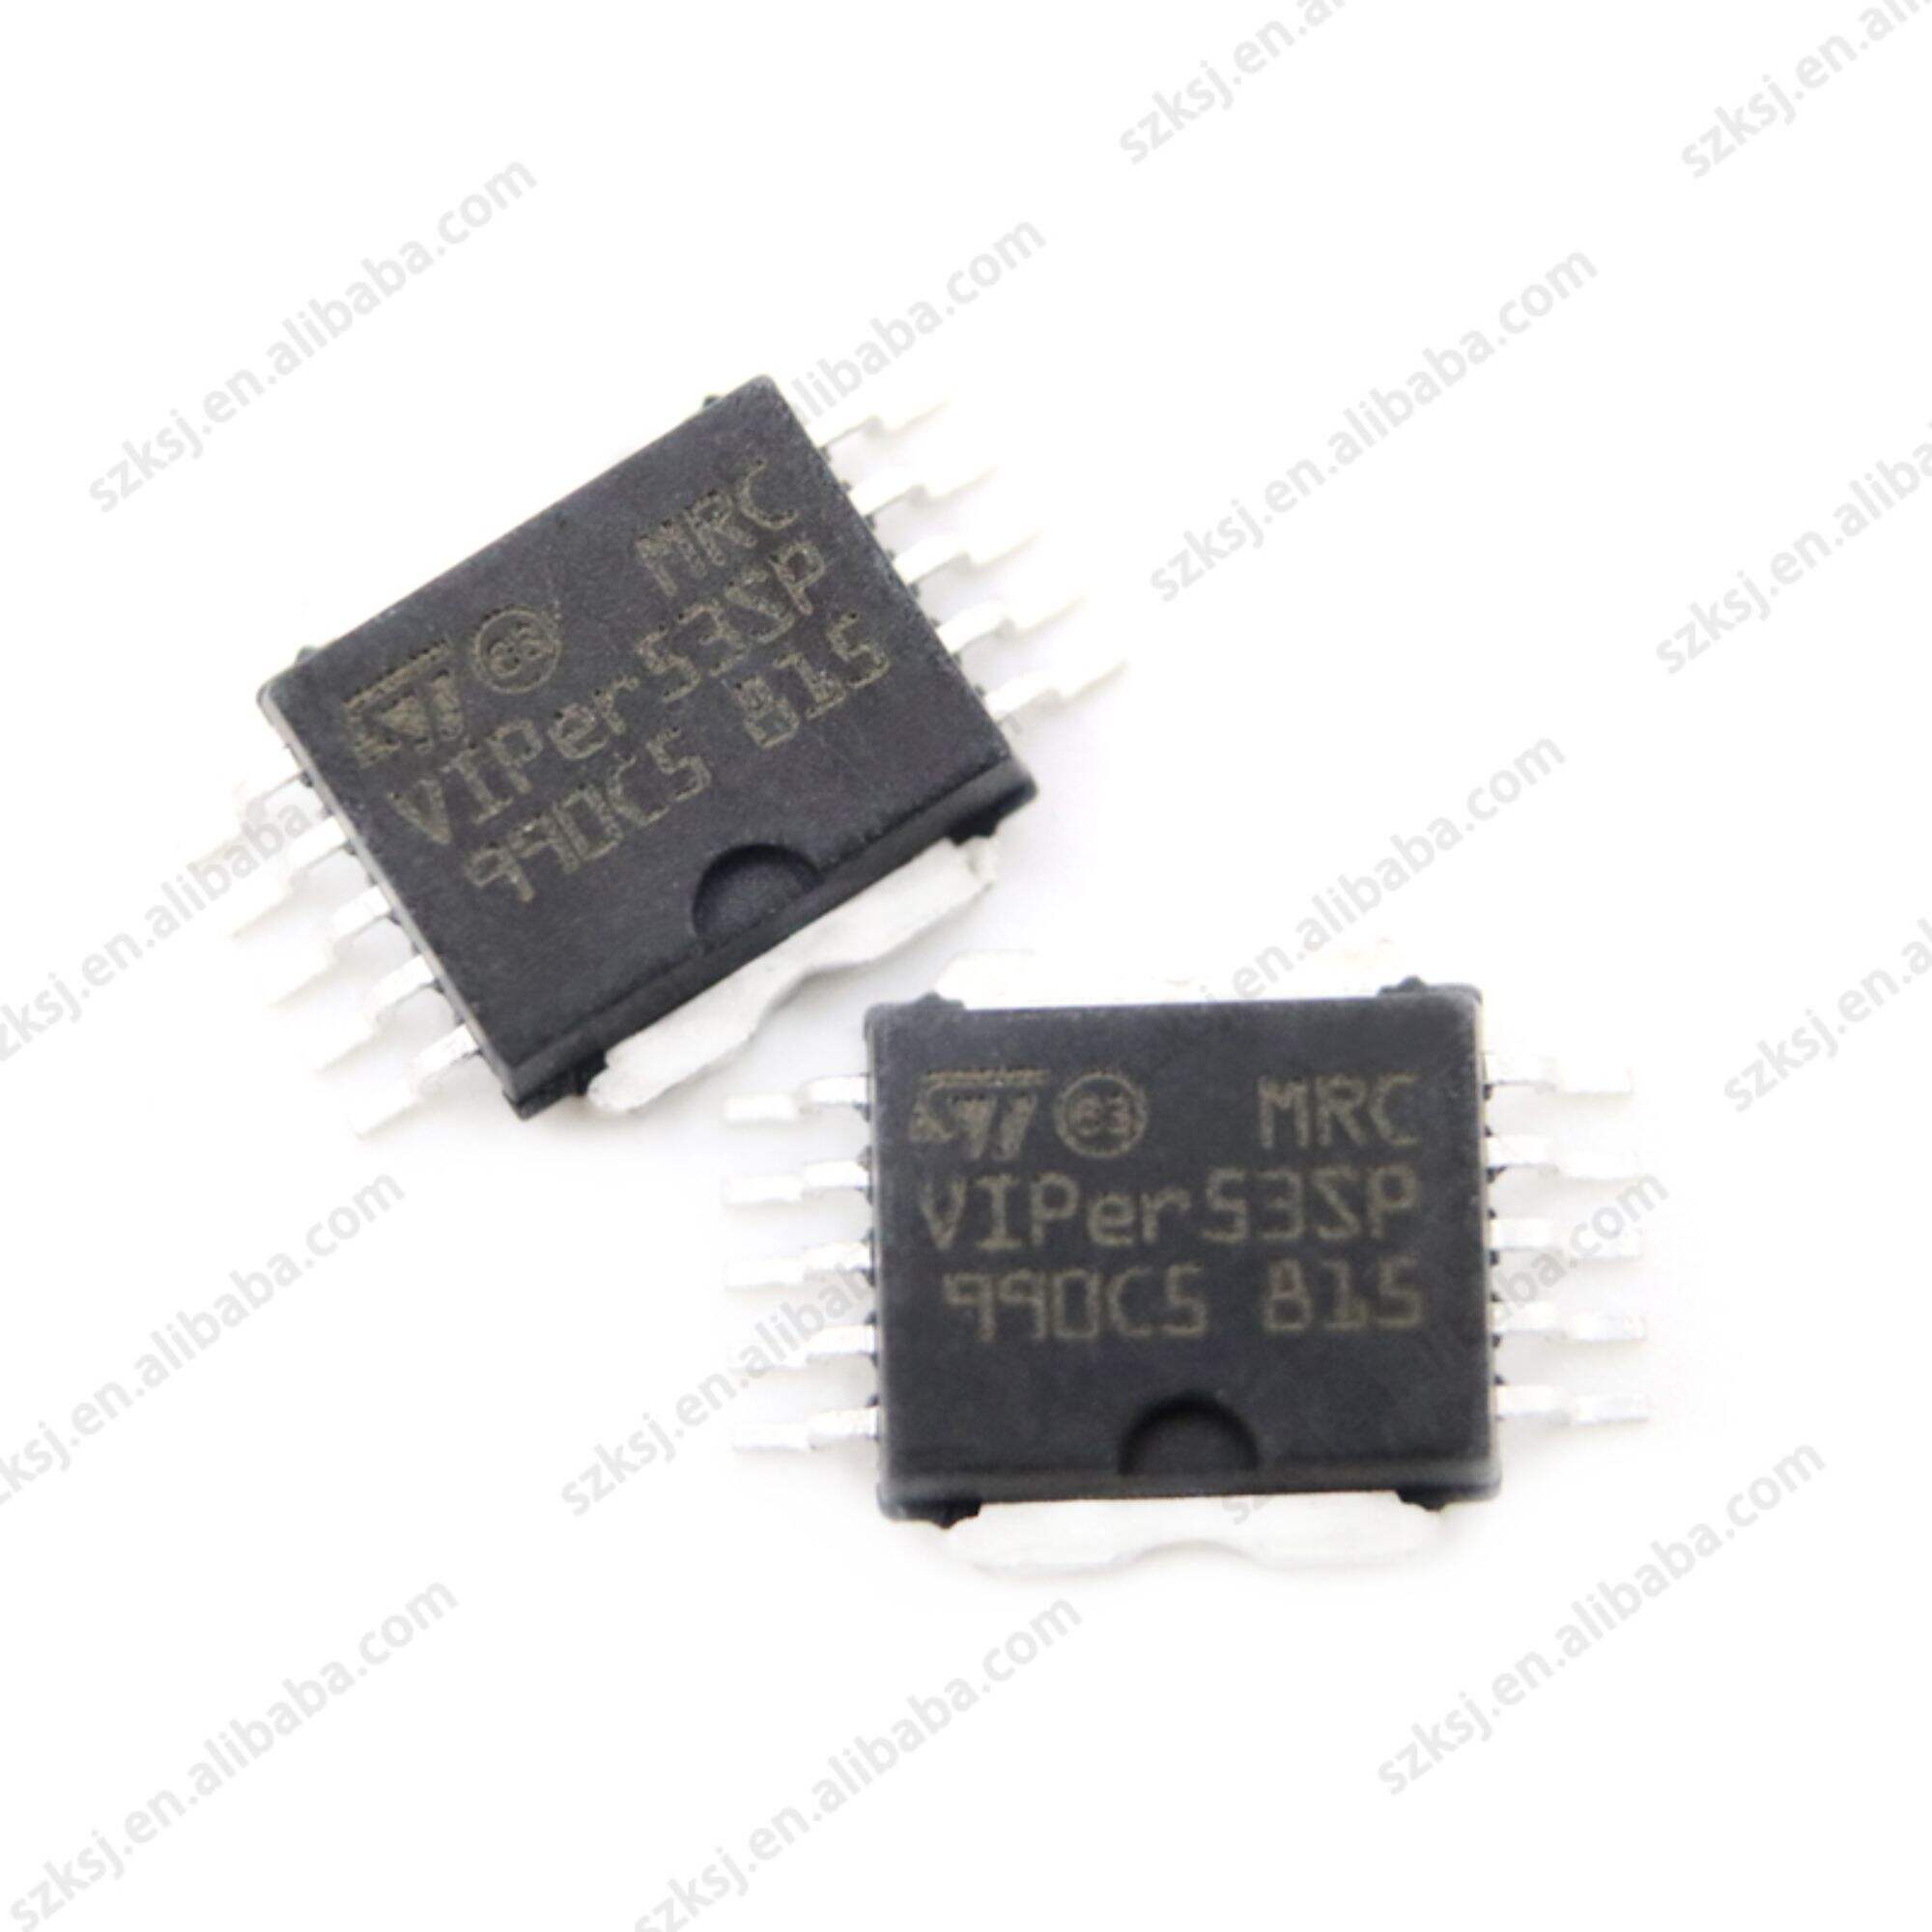 VIPER53SP new original spot automotive chip power switch IC SOP-10 integrated circuit IC